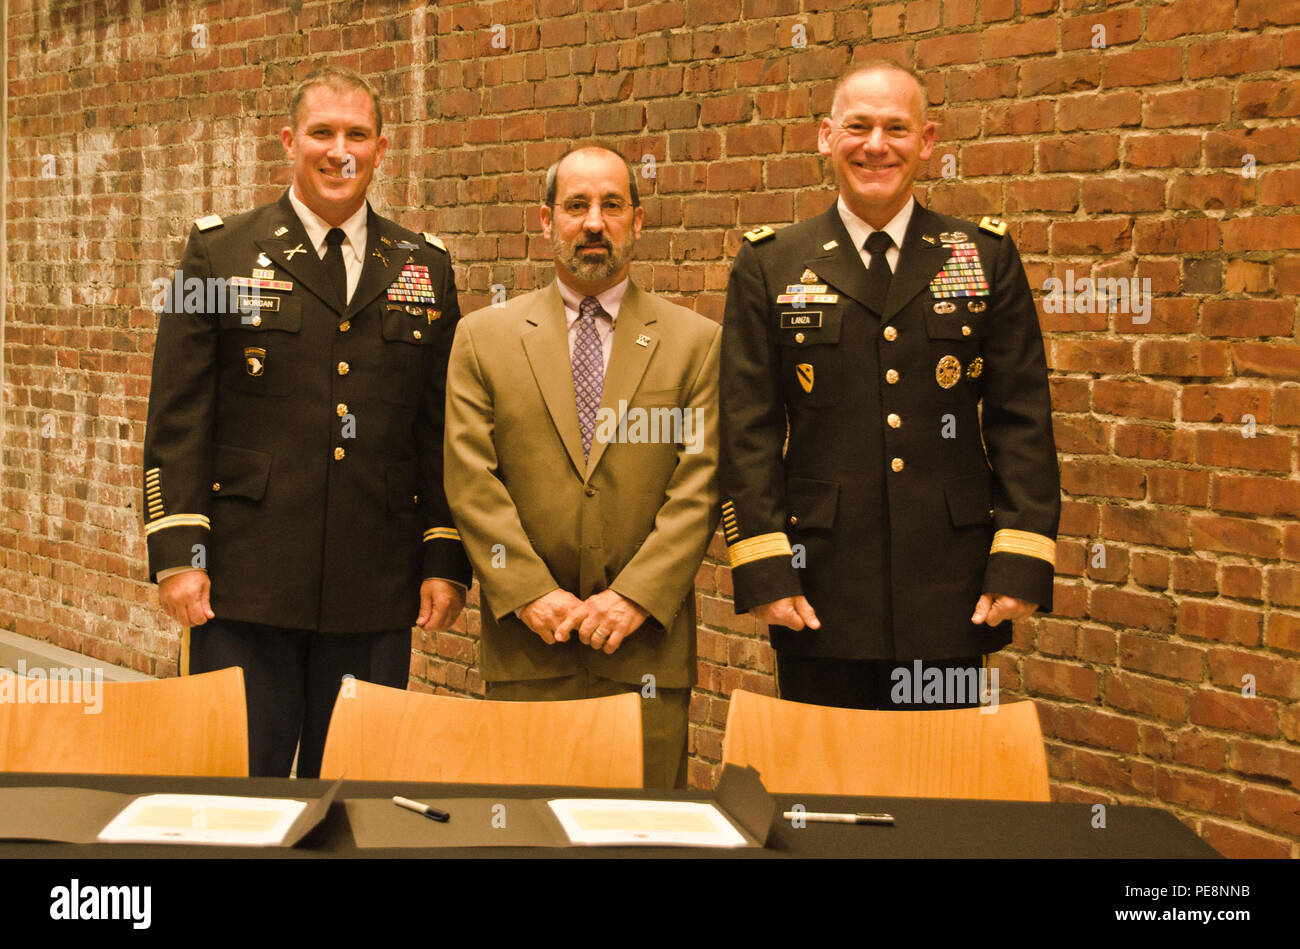 Col. Daniel S. Morgan, commander, Joint Base Lewis-McChord, left, Mark A. Pagano, chancellor, University of Washington-Tacoma, center, and Lt. Gen. Stephen R. Lanza, commanding general, I Corps, JBLM, right, come together to sign partnership resolutions at the UW-T, Oct. 29, 2015. Both JBLM and I Corps signed partnership resolutions with the UW-T agreeing to become a model university and military institutional partnership. (U.S. Army photo by Sgt. Jasmine Higgins, 28th Public Affairs Detachment) Stock Photo